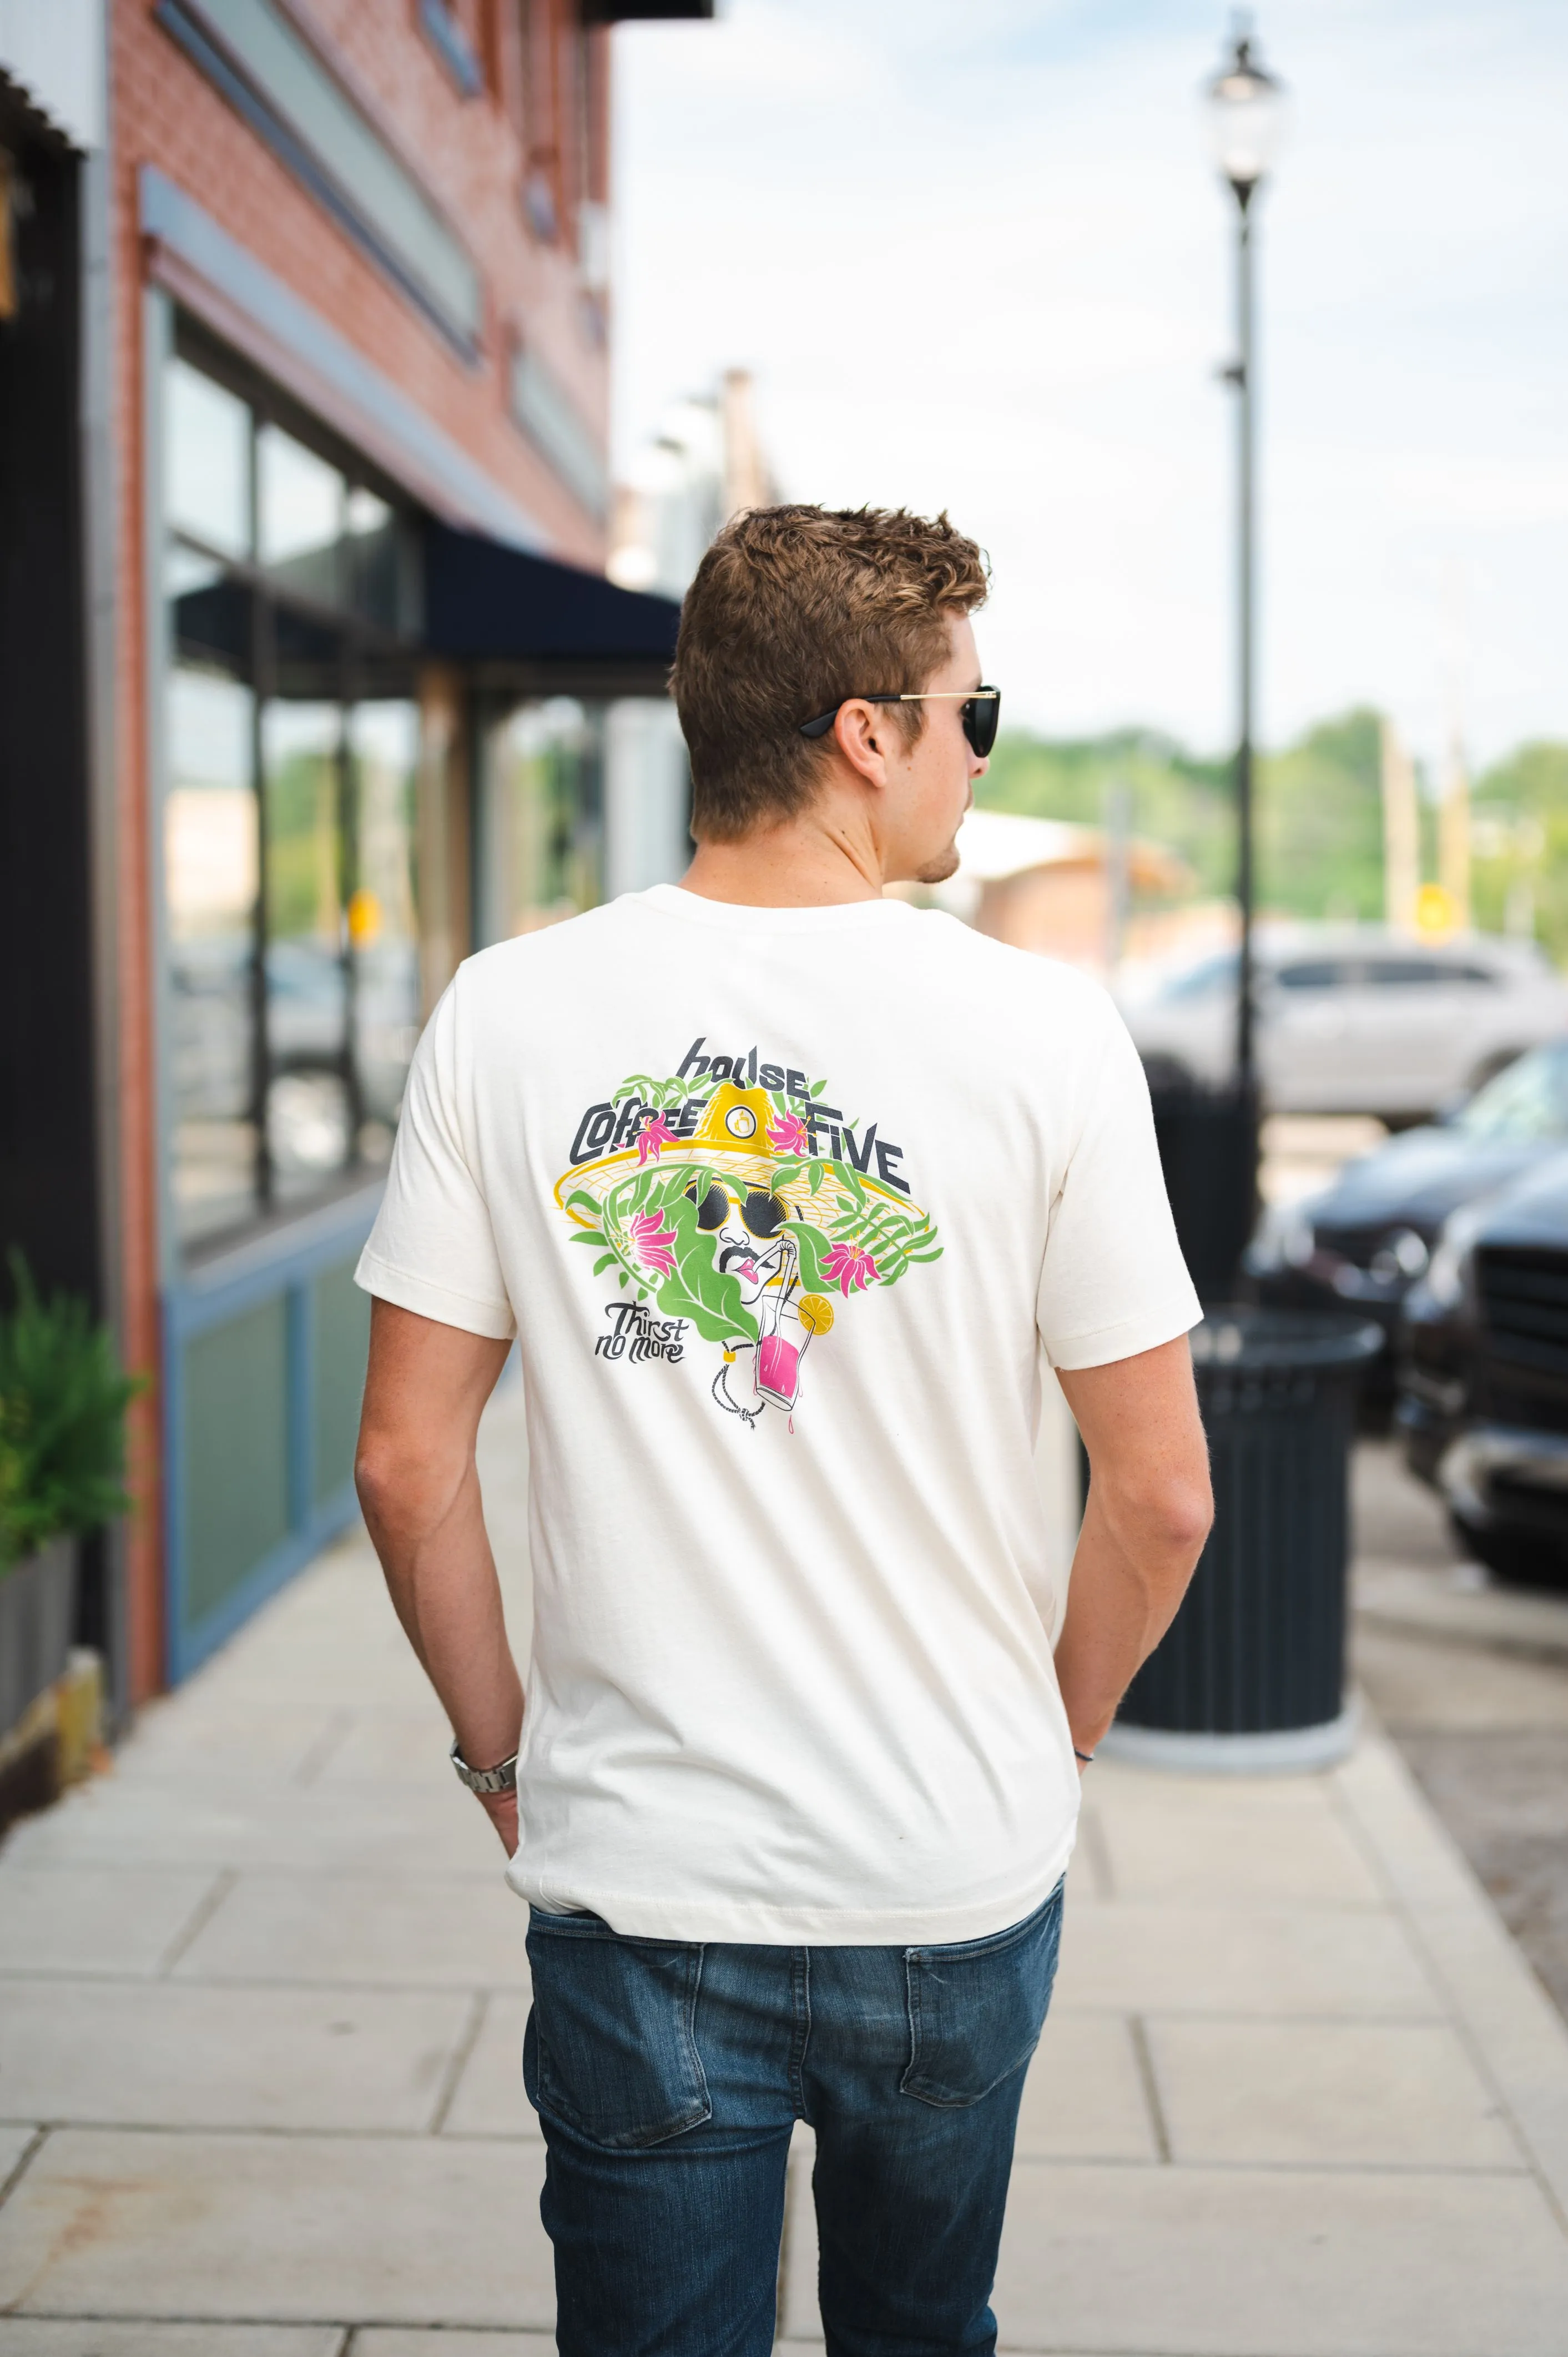 Man wearing white t-shirt with colorful back print and sunglasses walking on a city sidewalk.